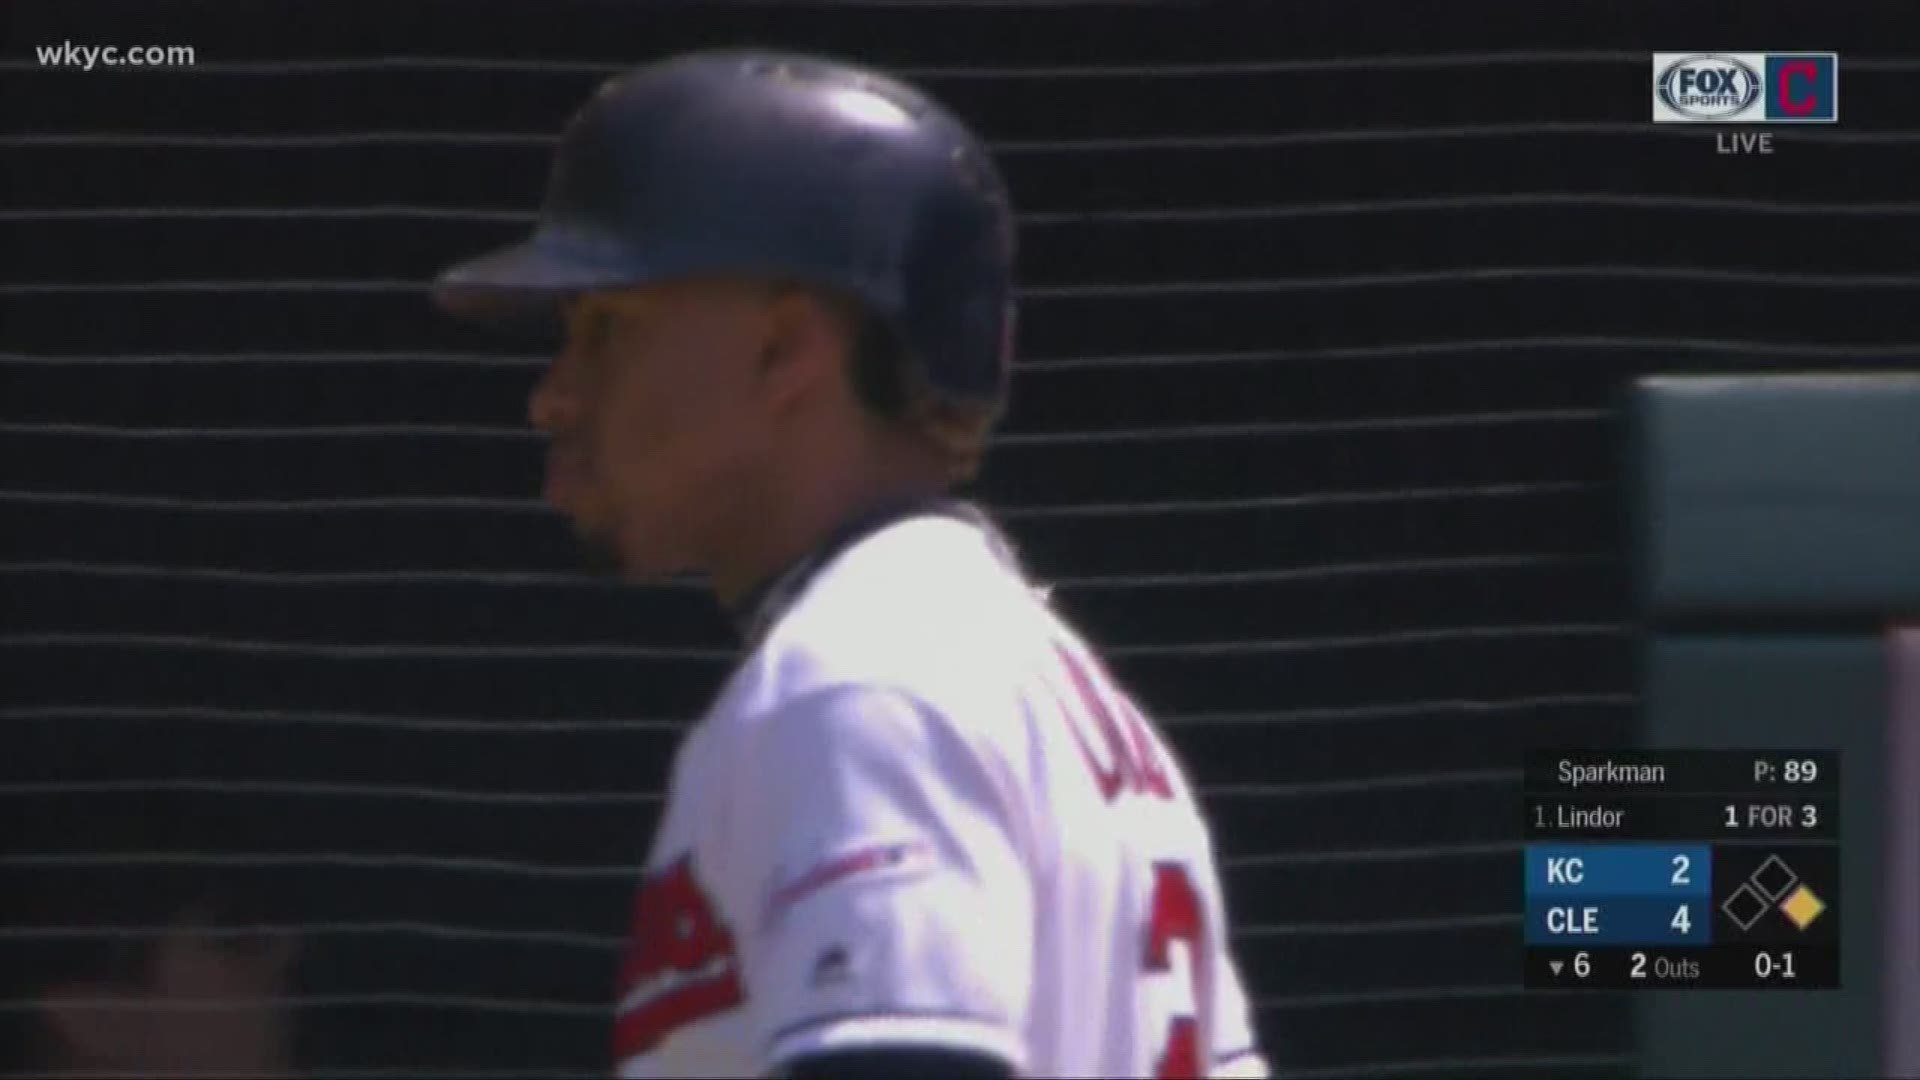 Francisco Lindor speaks out after child struck by foul ball